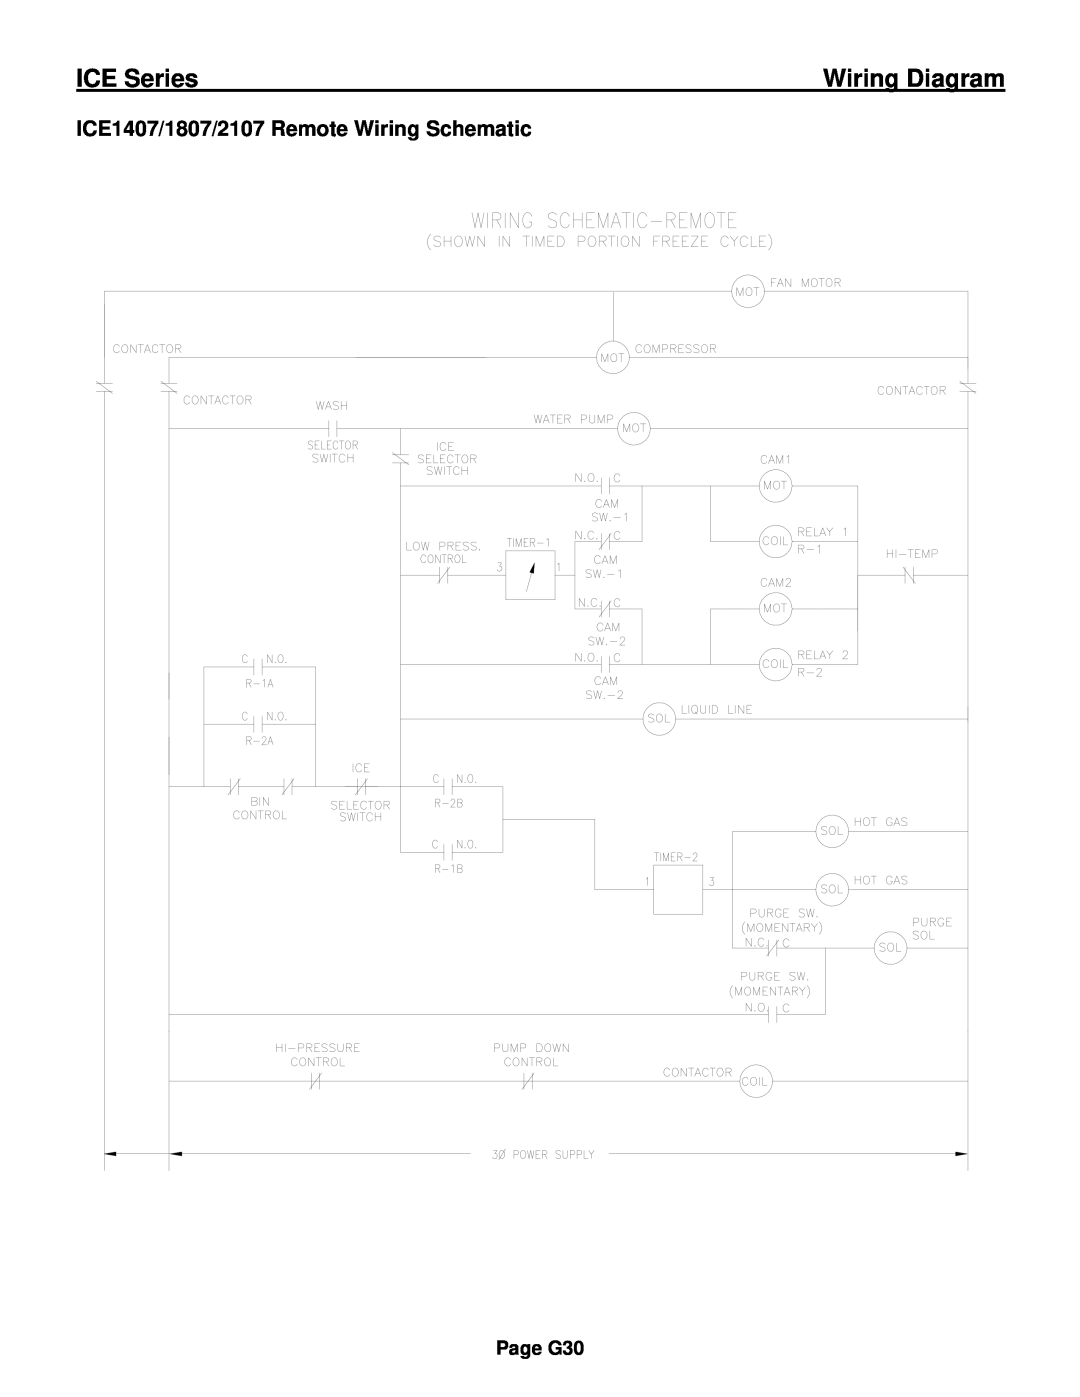 Ice-O-Matic ICE0250 Series ICE1407/1807/2107 Remote Wiring Schematic, ICE Series, Wiring Diagram, Page G30 